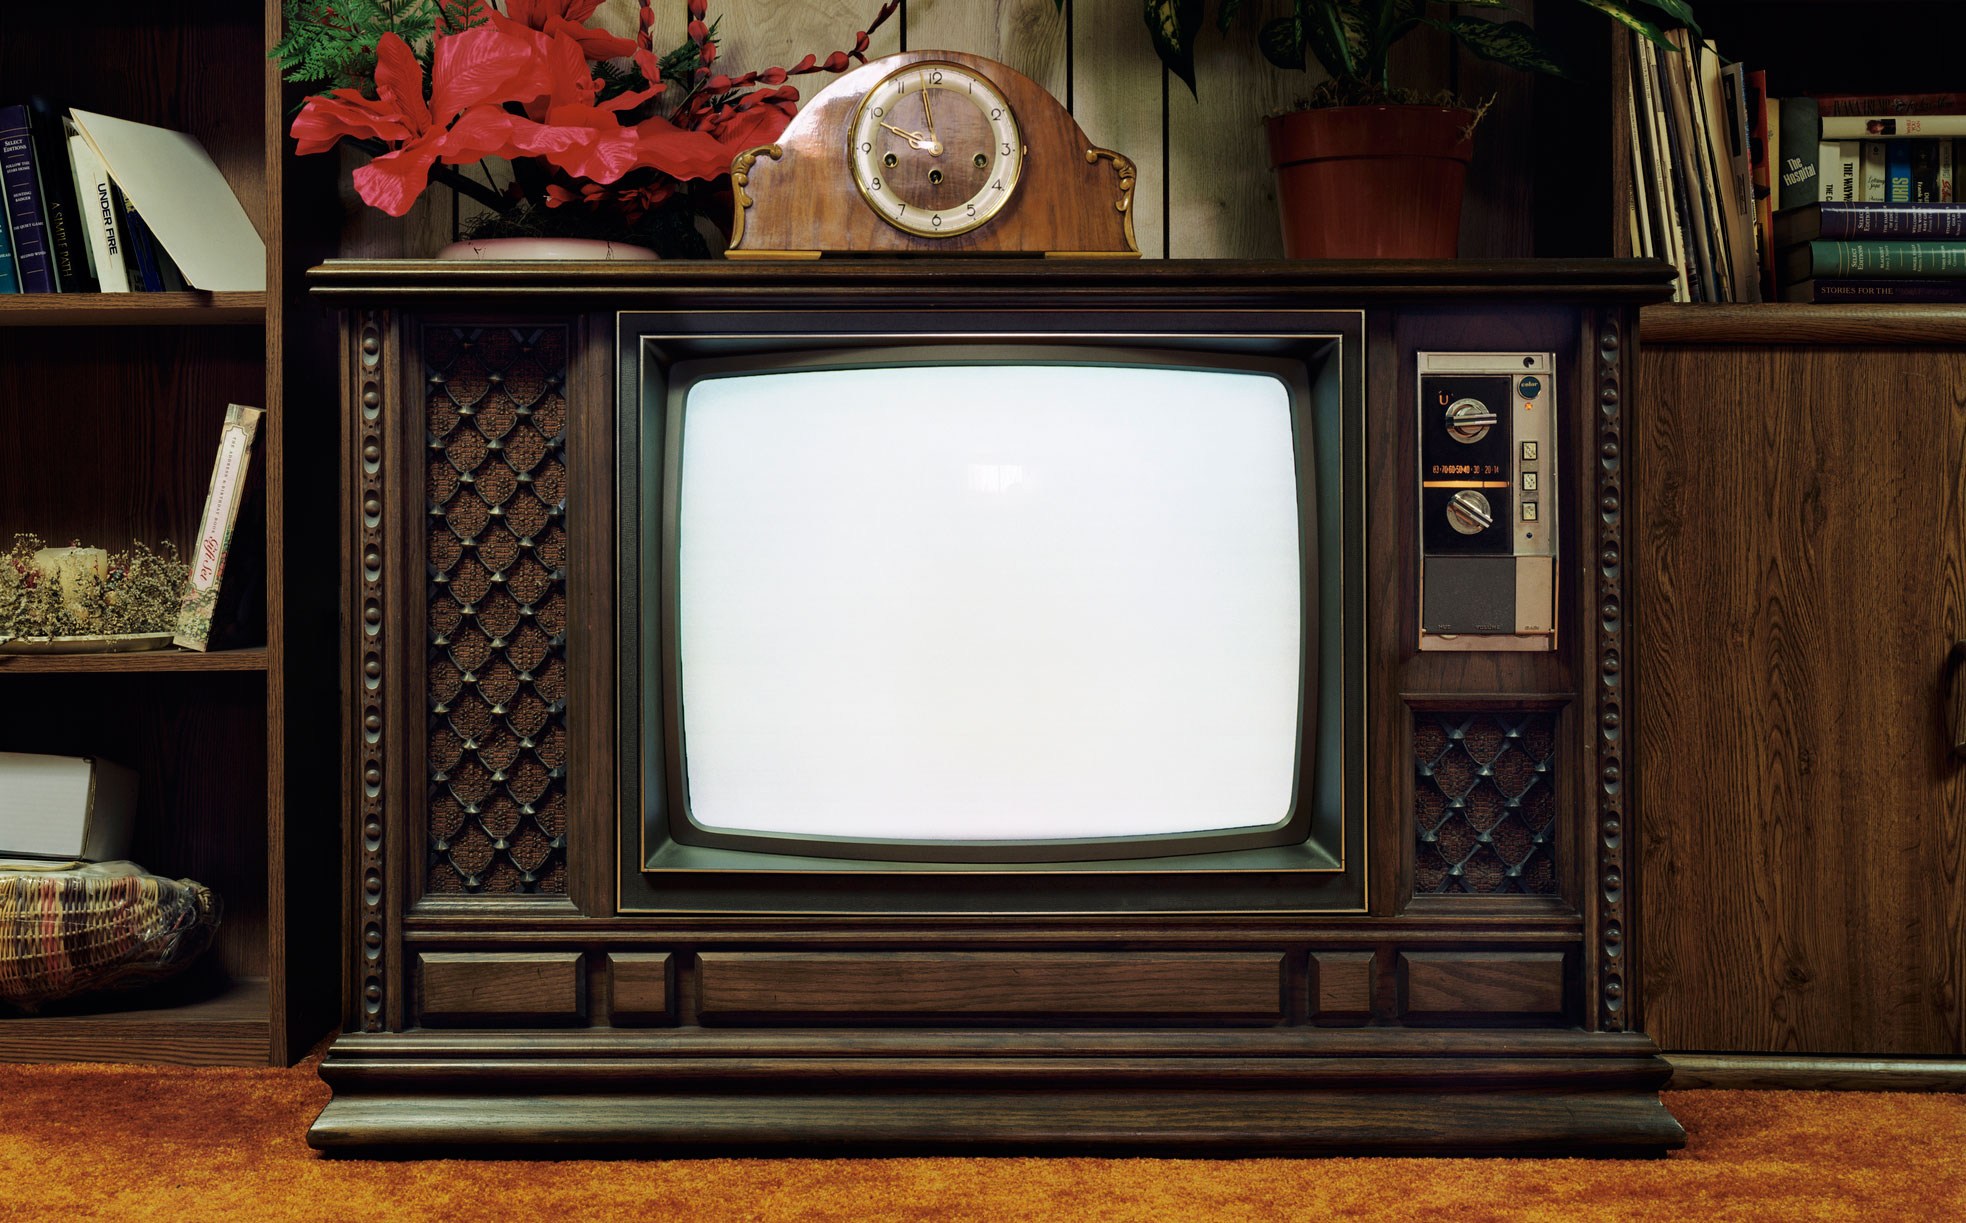 Old Television Set In Living Room